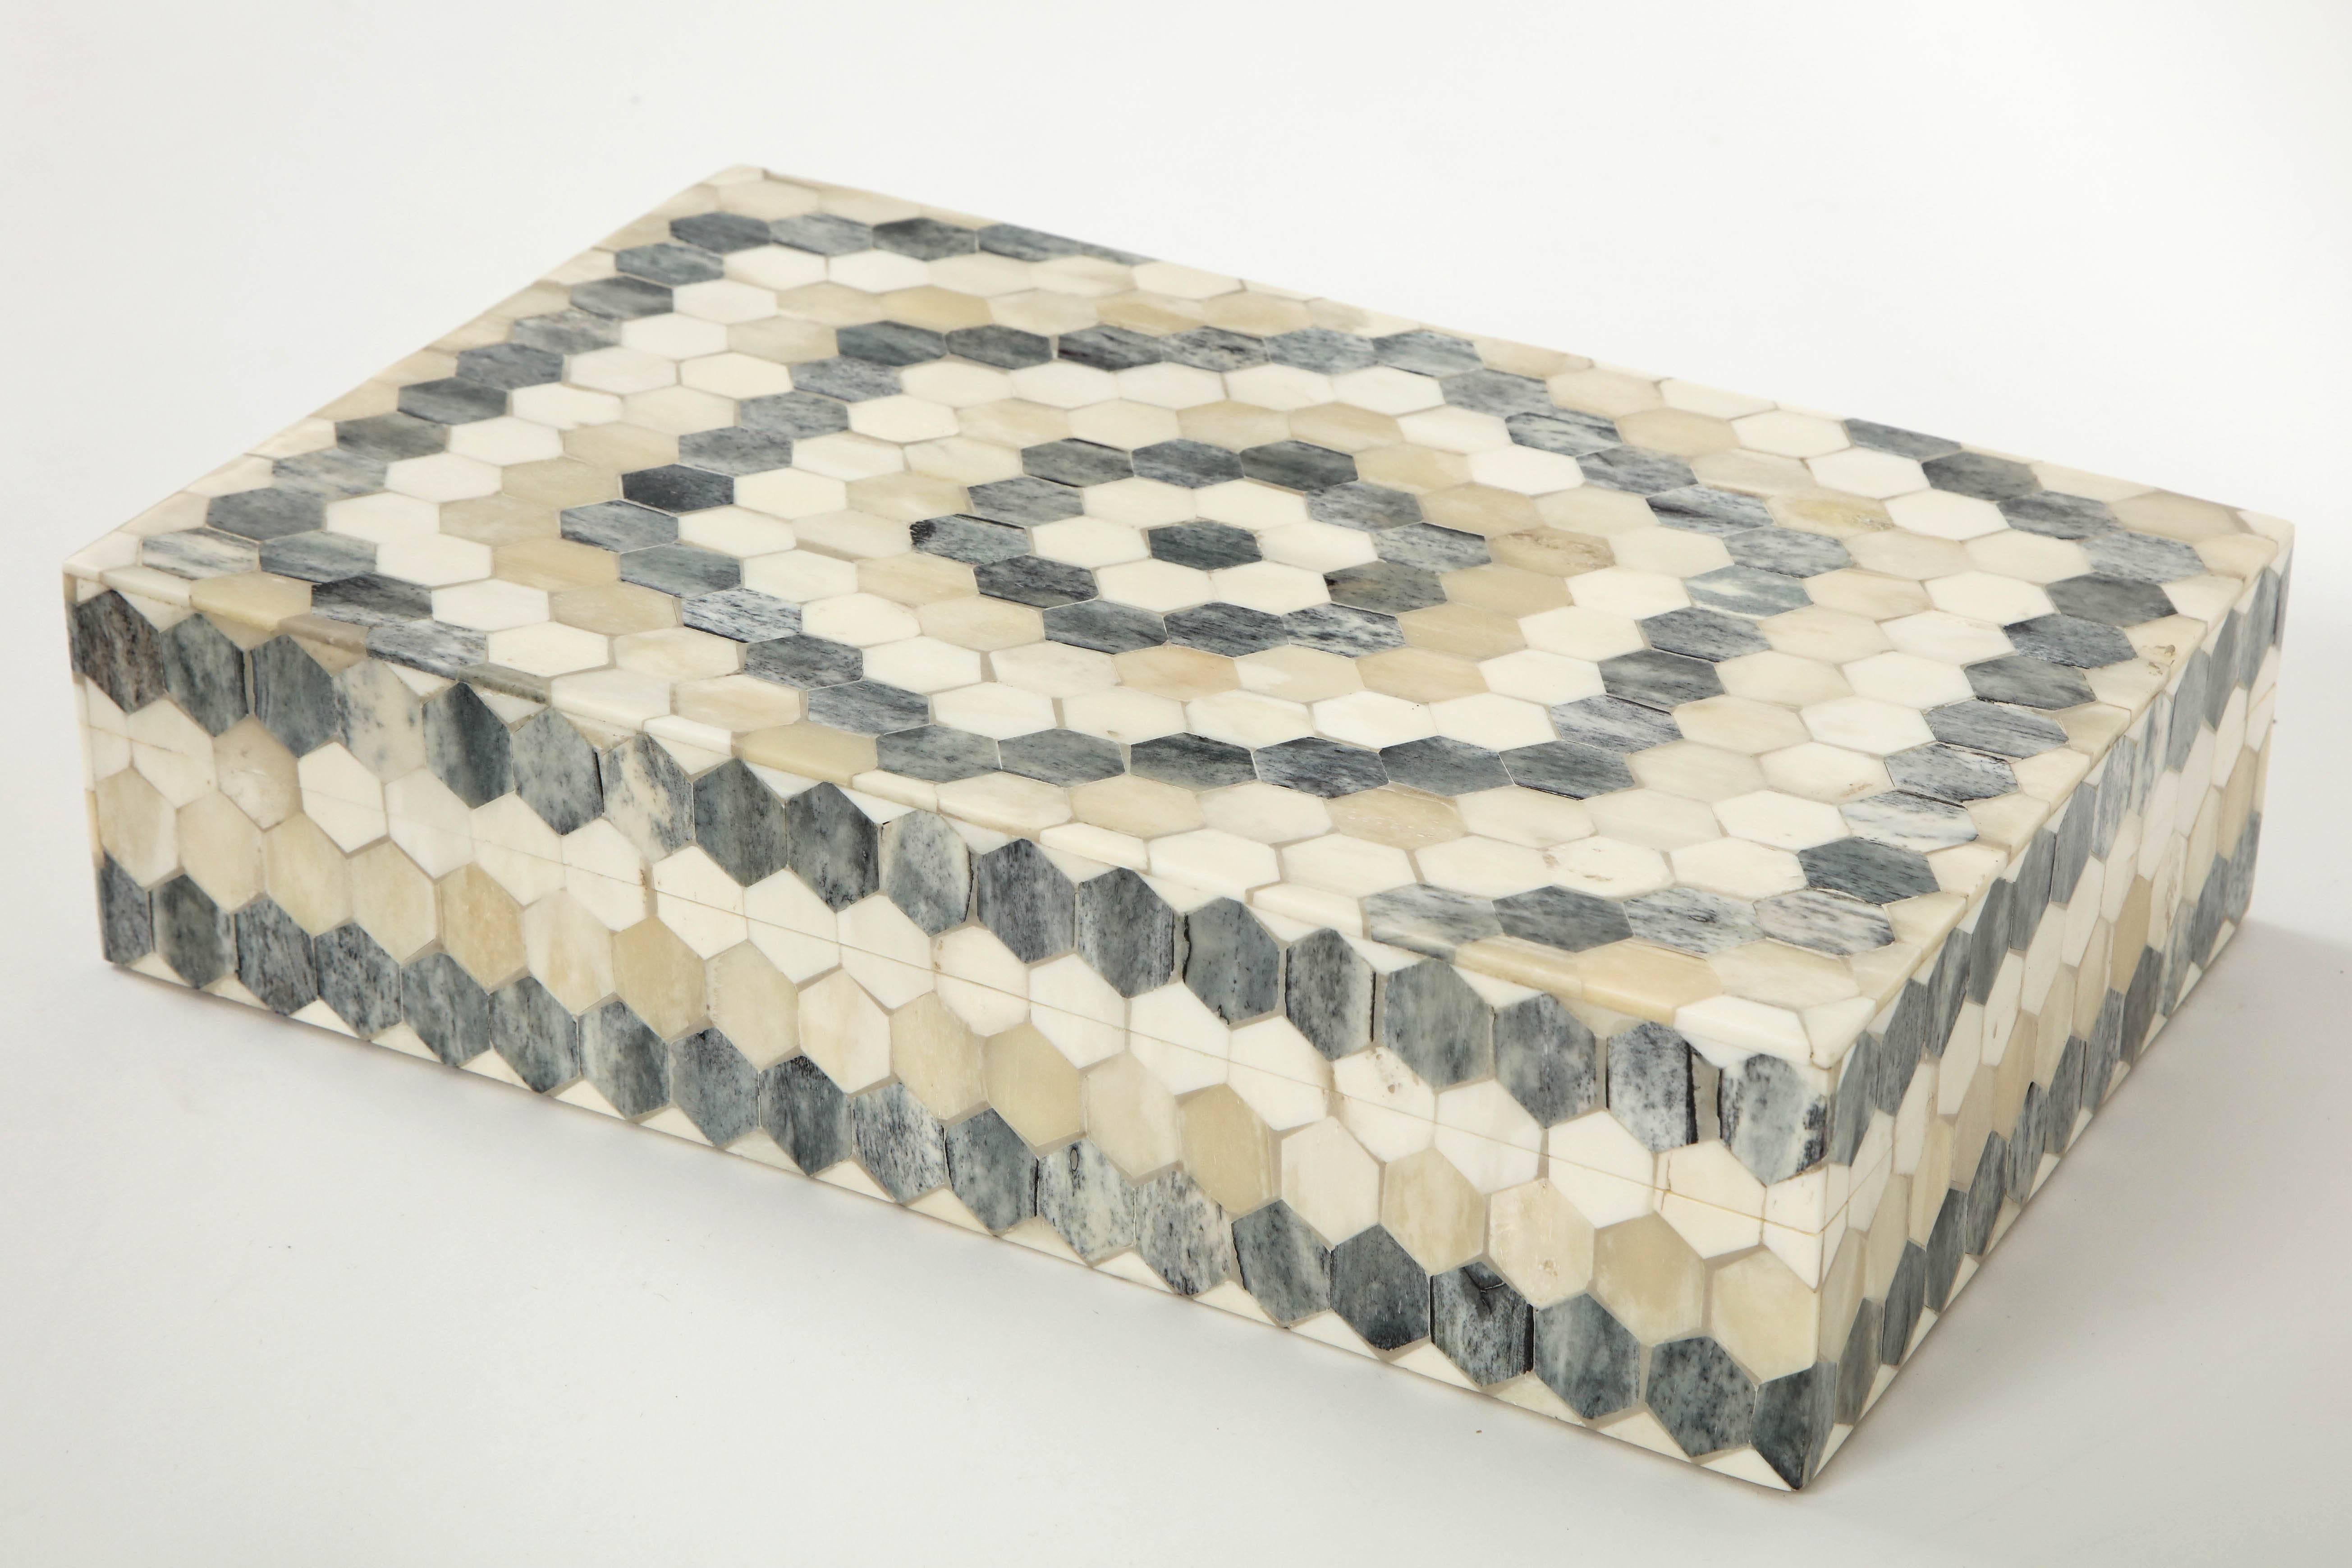 Contemporary keepsake box/remote control keeper adorned with hexagonal shaped bone tiles in grey and natural, lined in zebrawood.